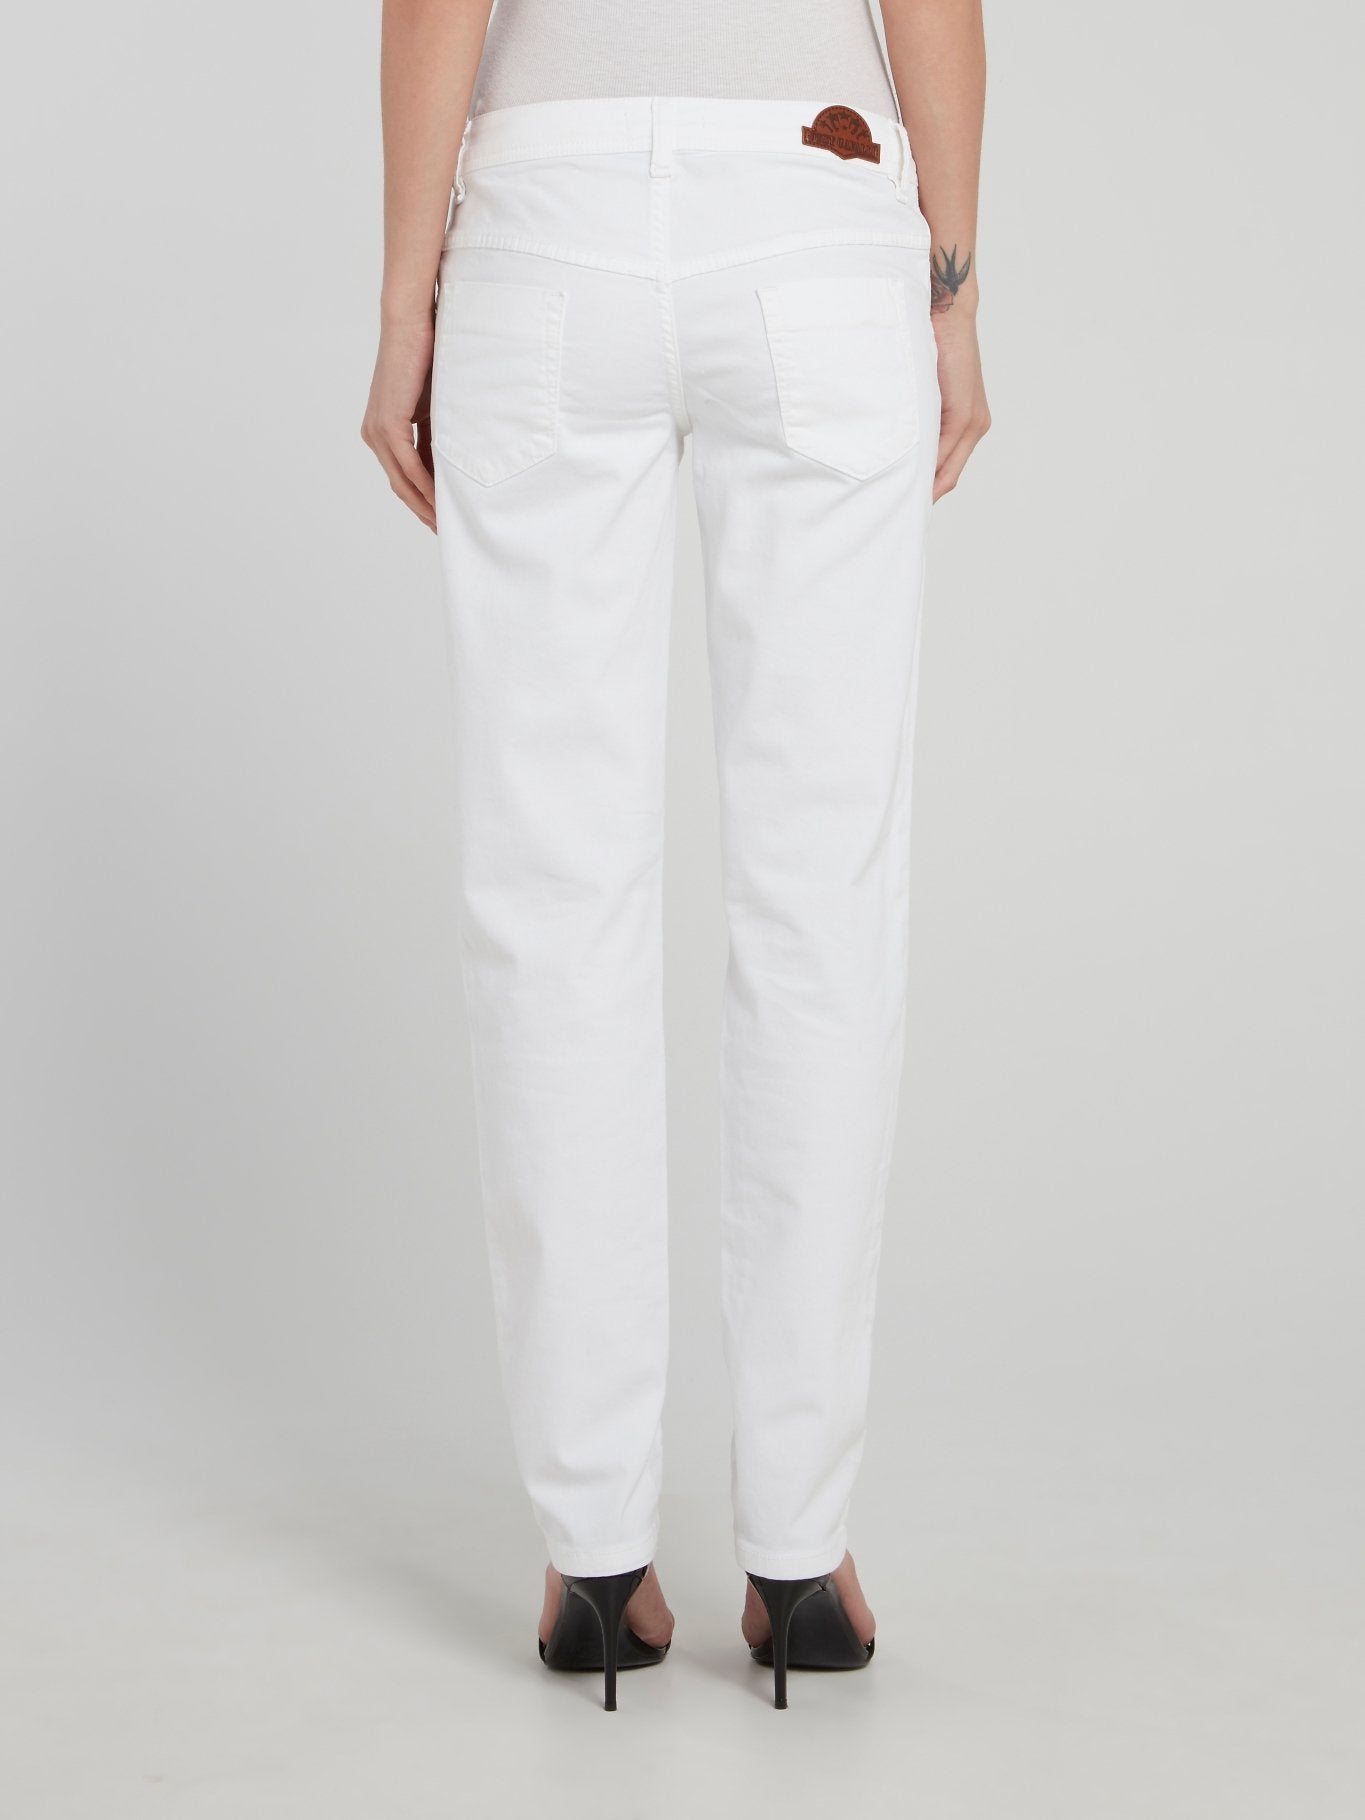 White Distressed Straight Cut Jeans